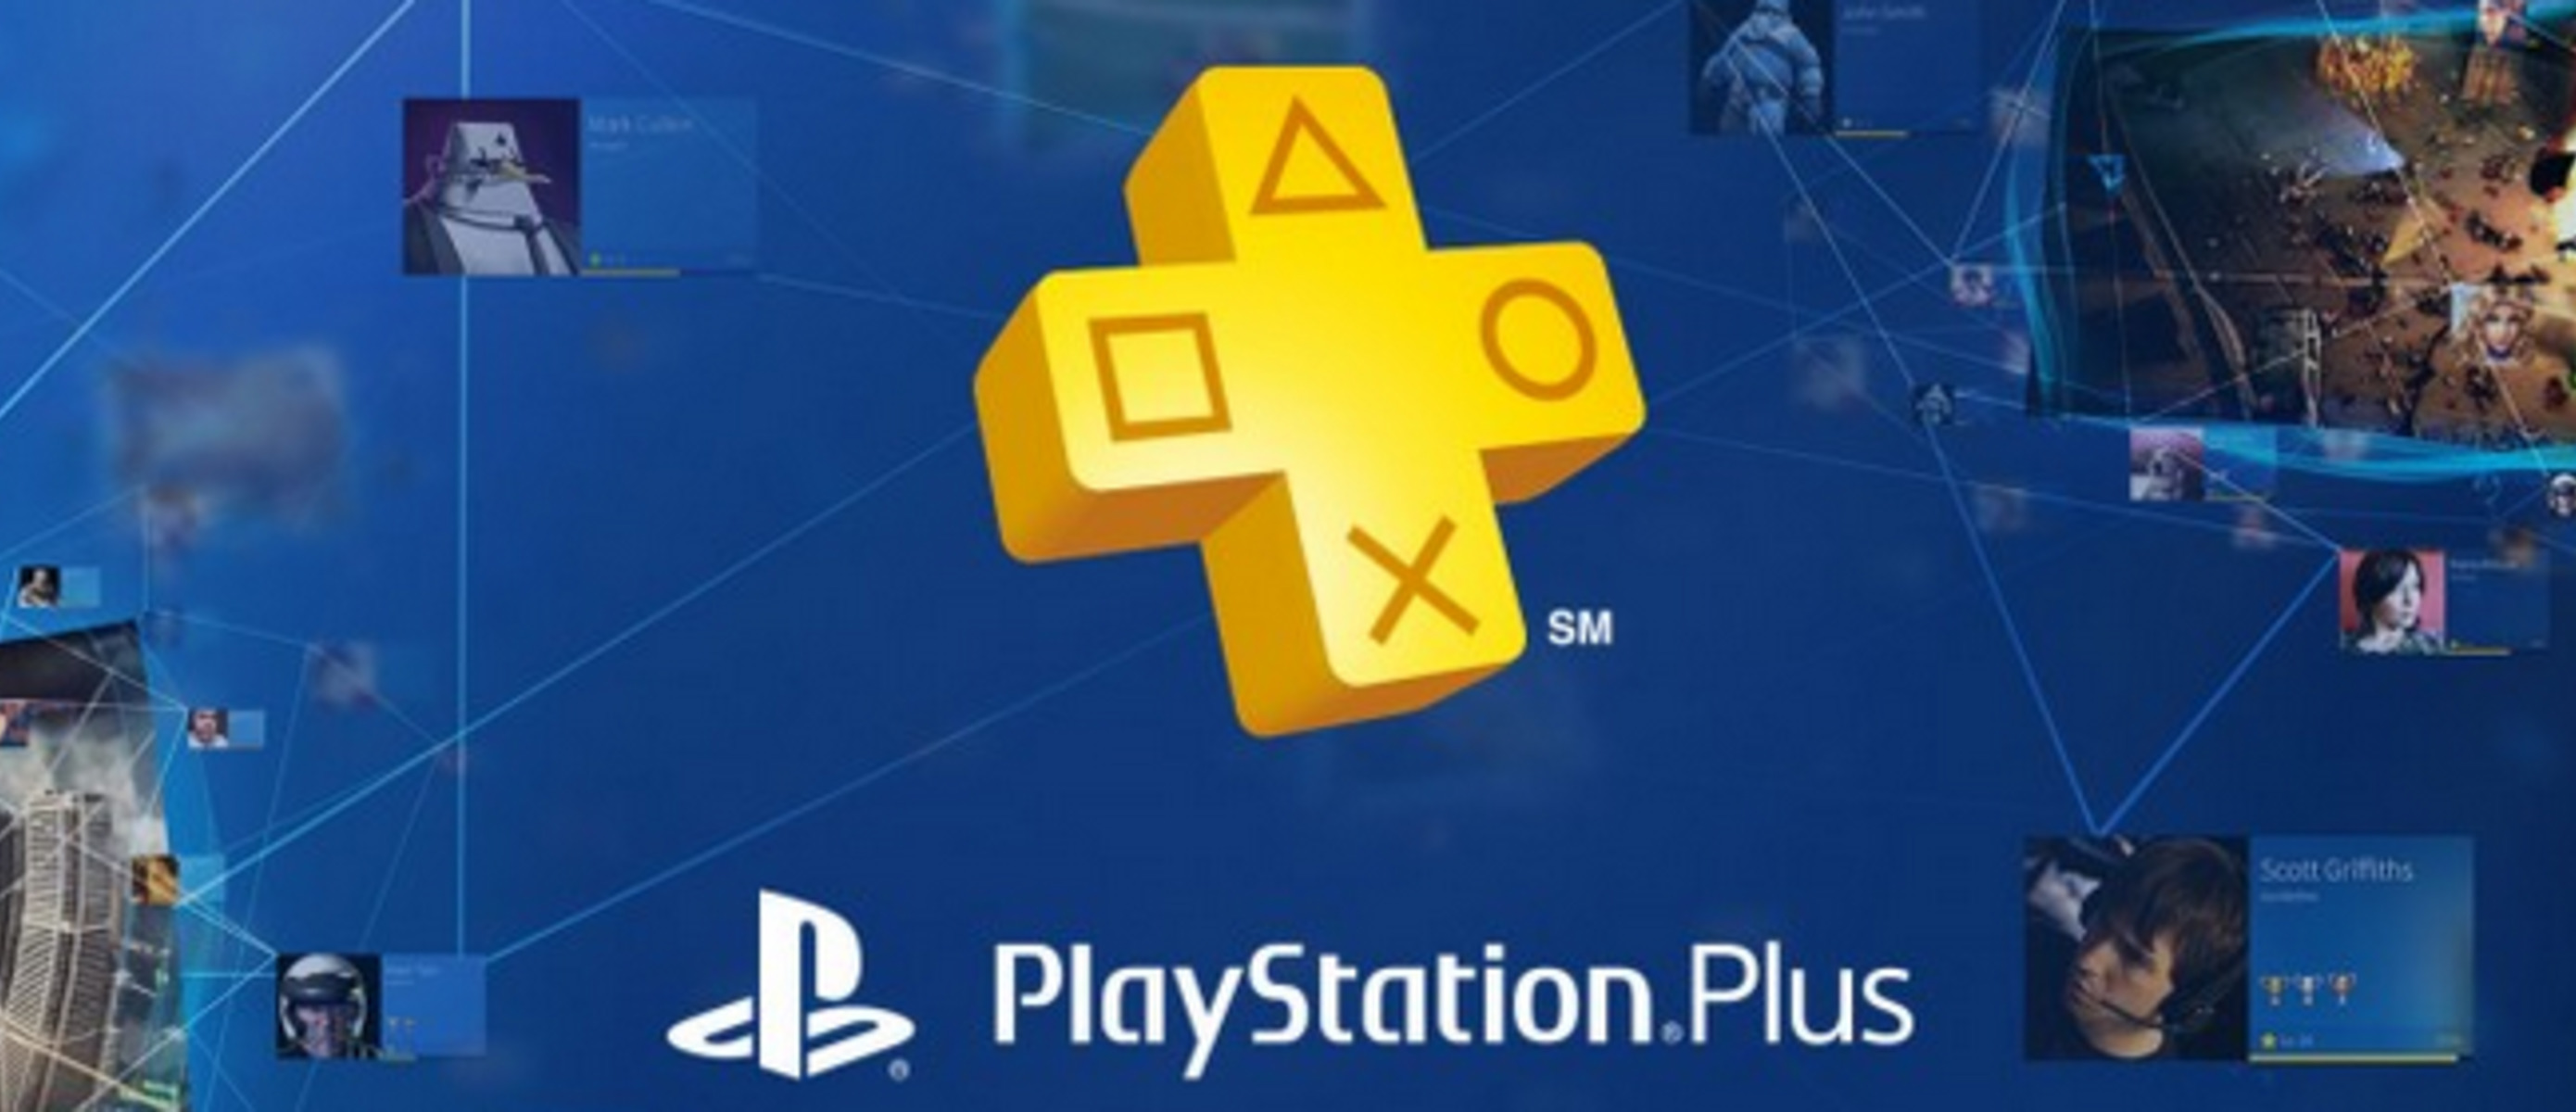 Ps4 extra. PLAYSTATION Plus Deluxe. Sony PLAYSTATION Plus на 12. PLAYSTATION 4 PS Plus. PLAYSTATION Plus Extra.